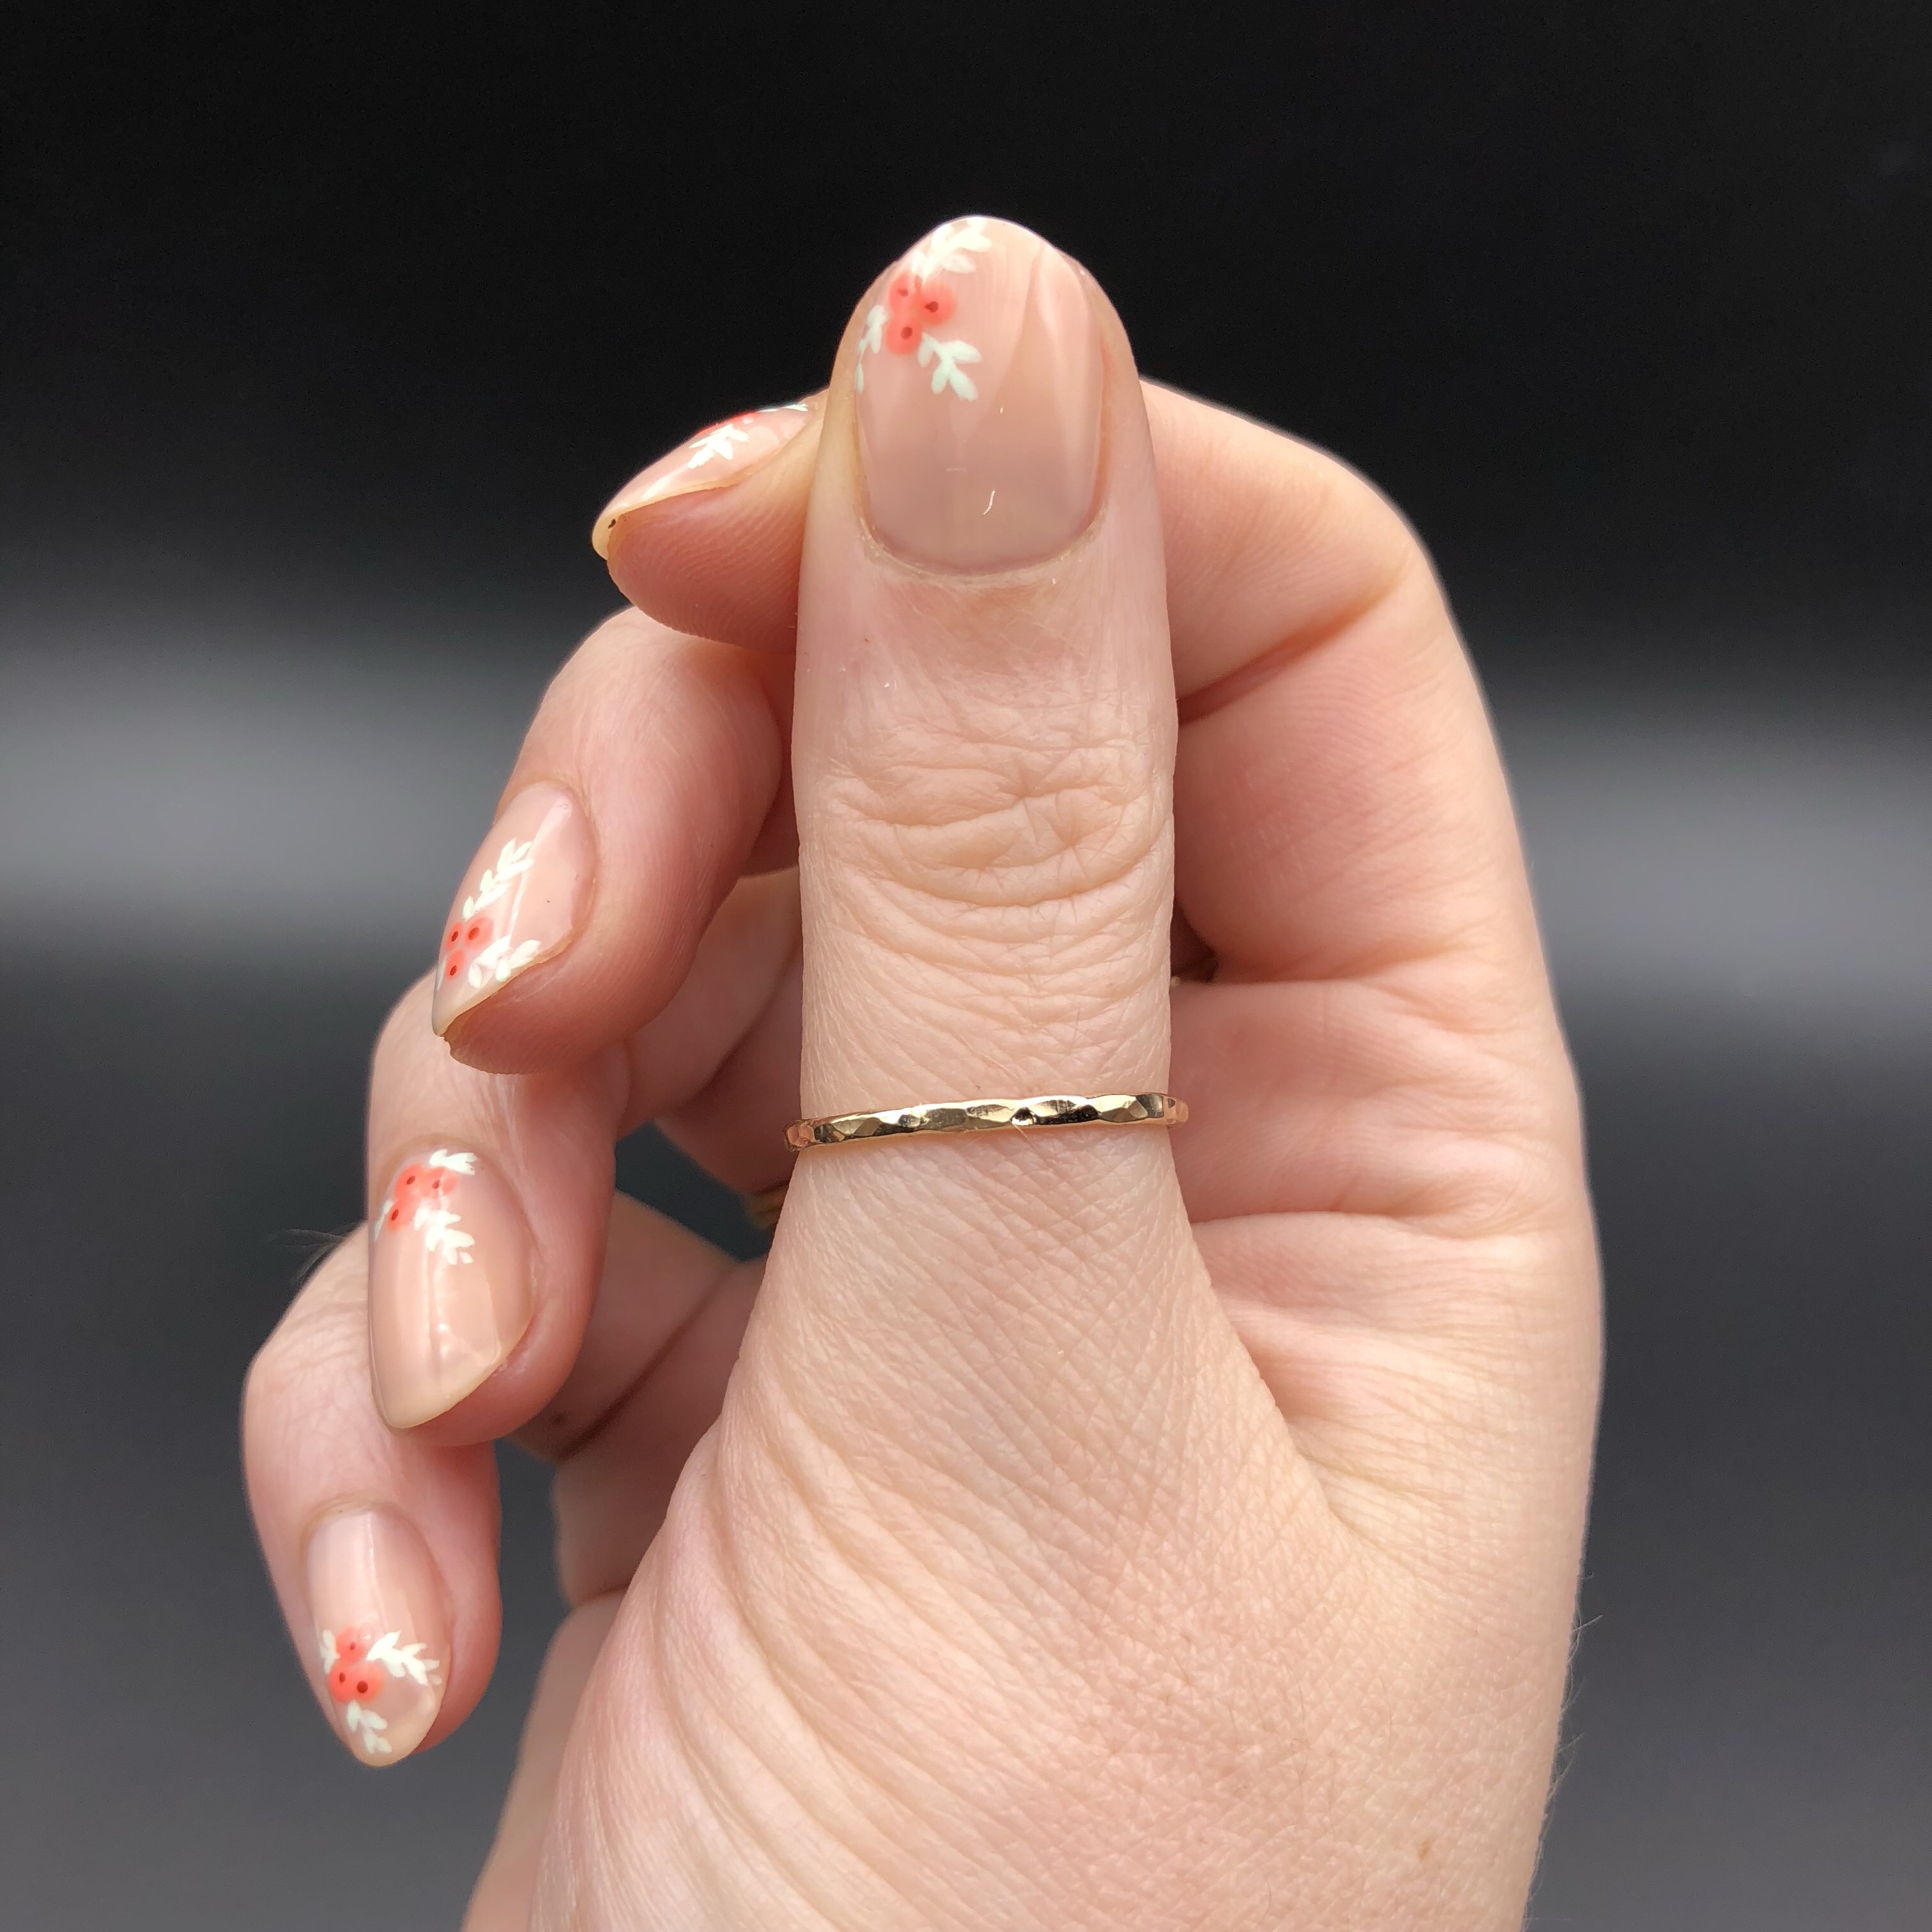 Thumb ring meaning for a woman